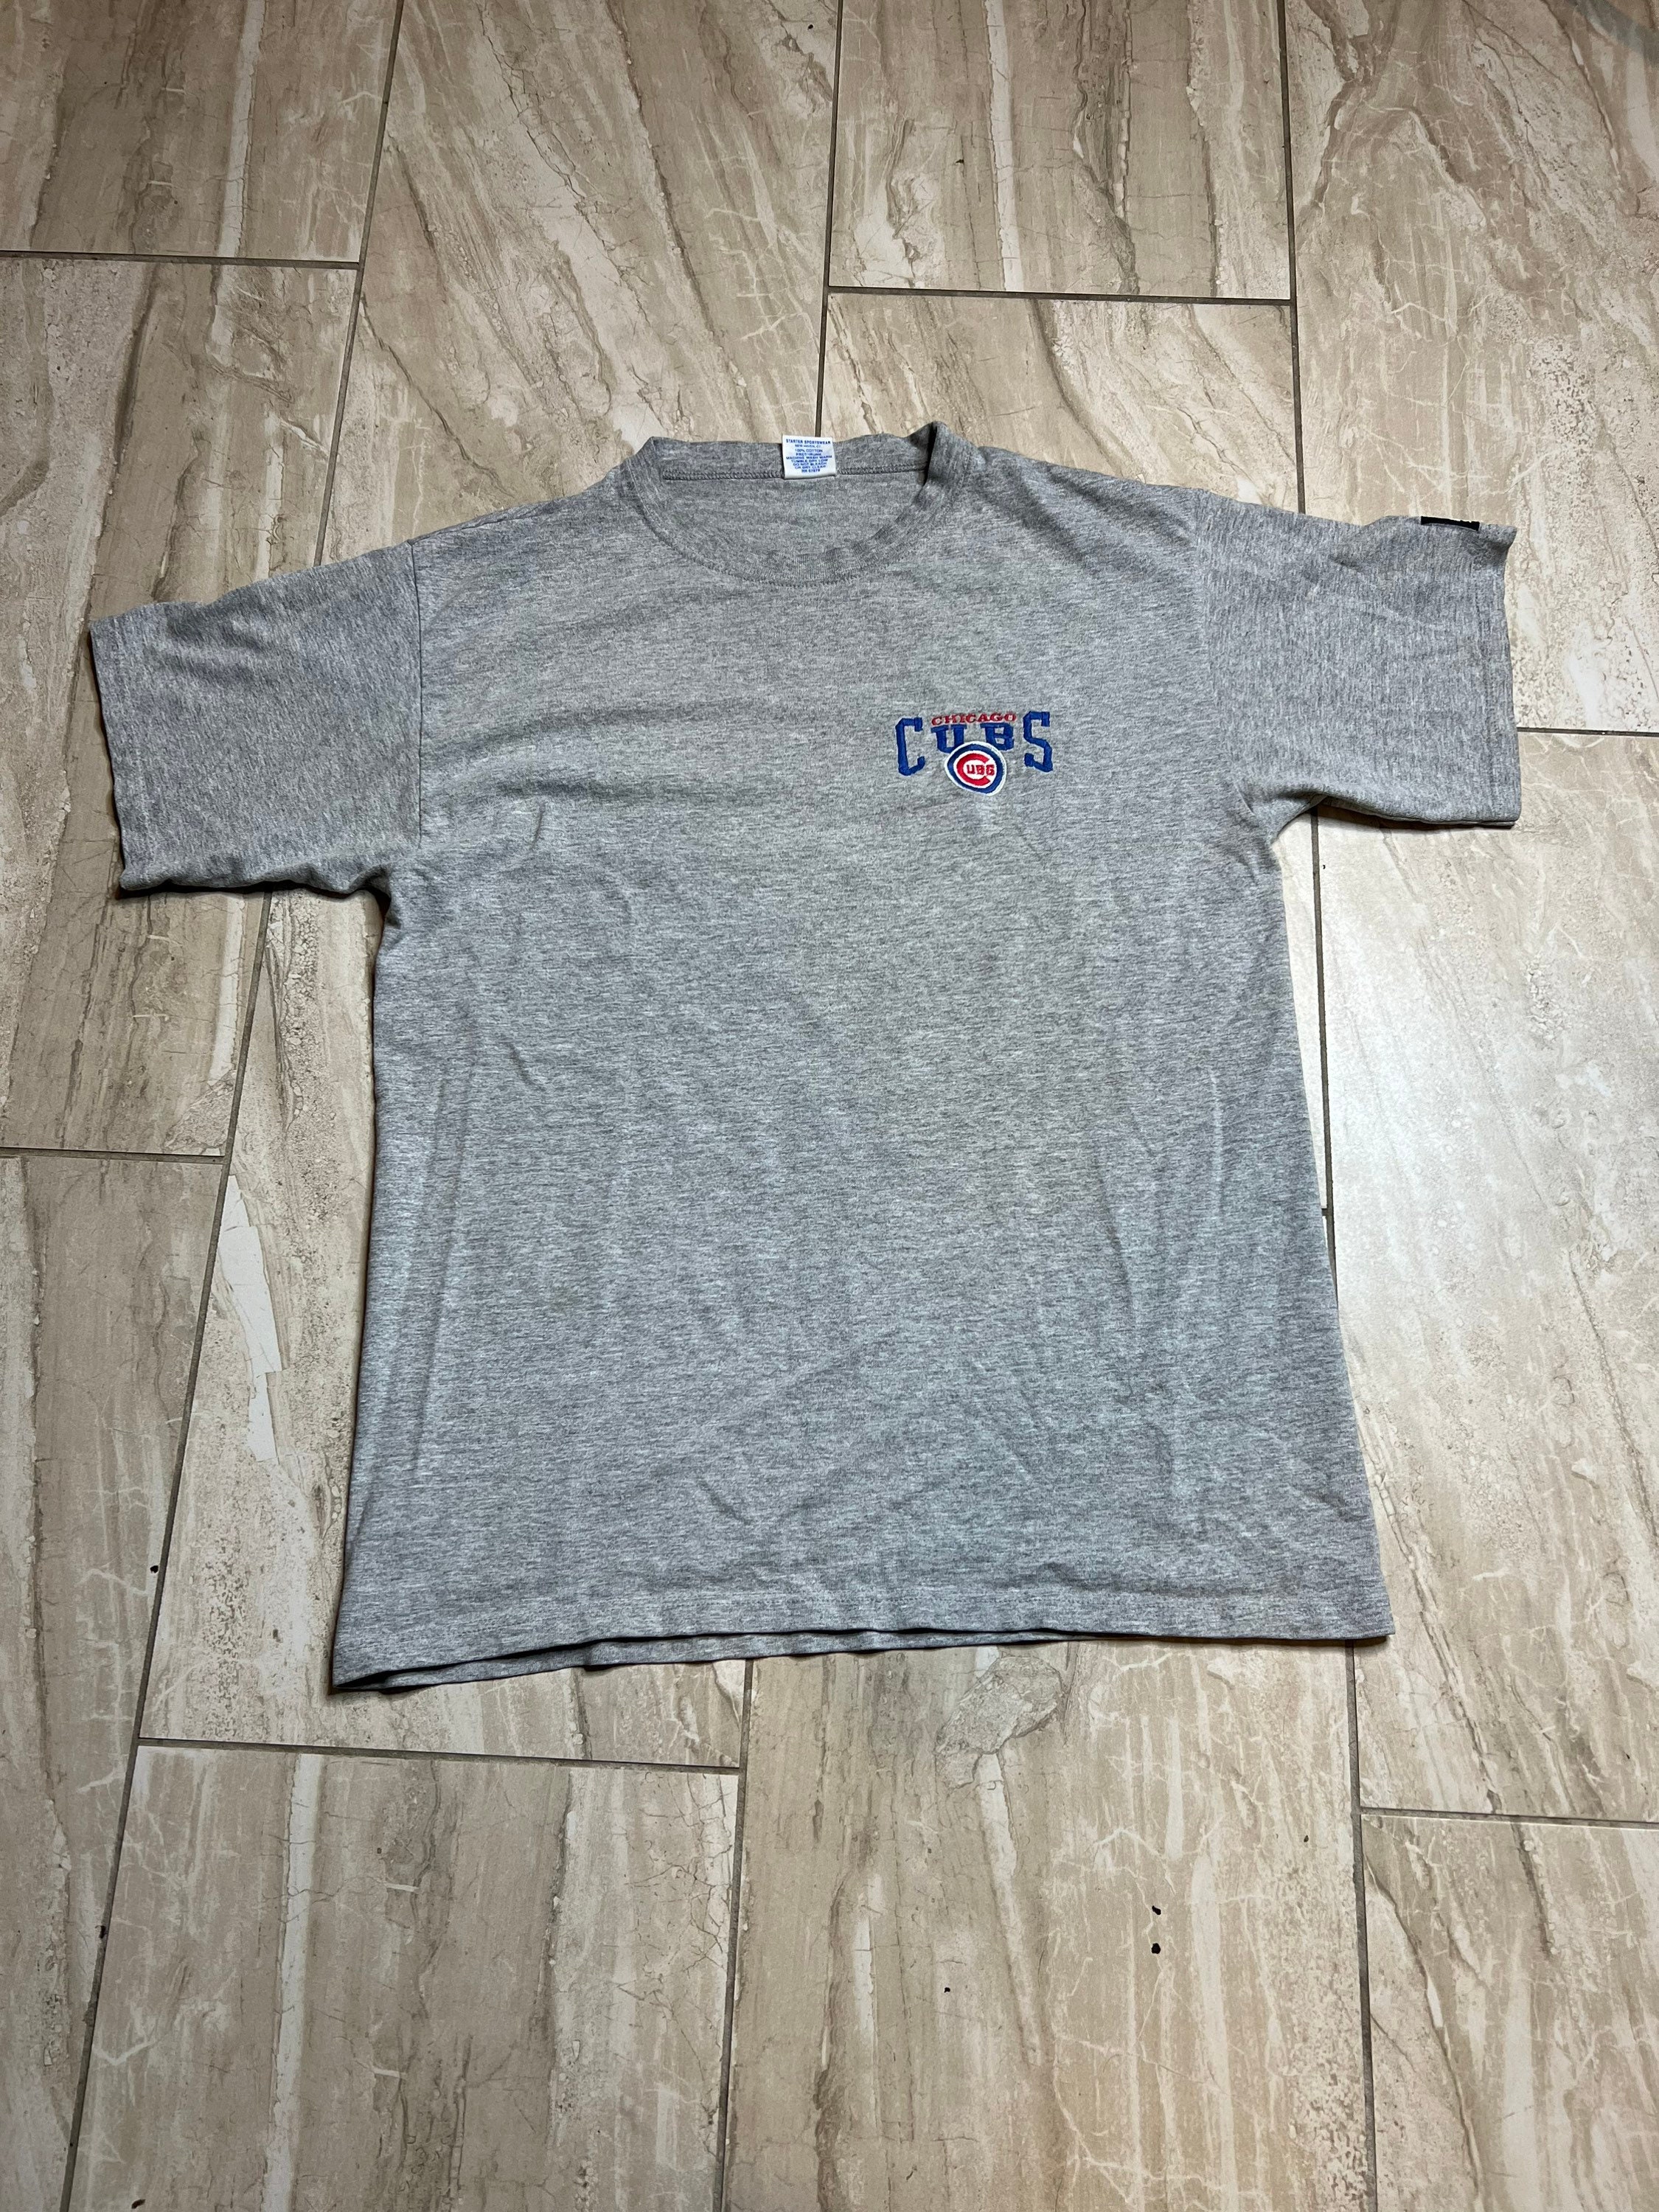 Vintage Chicago Cubs Shirt Men XL White Tee Long Sleeve Spell Out Y2K Adult  Top